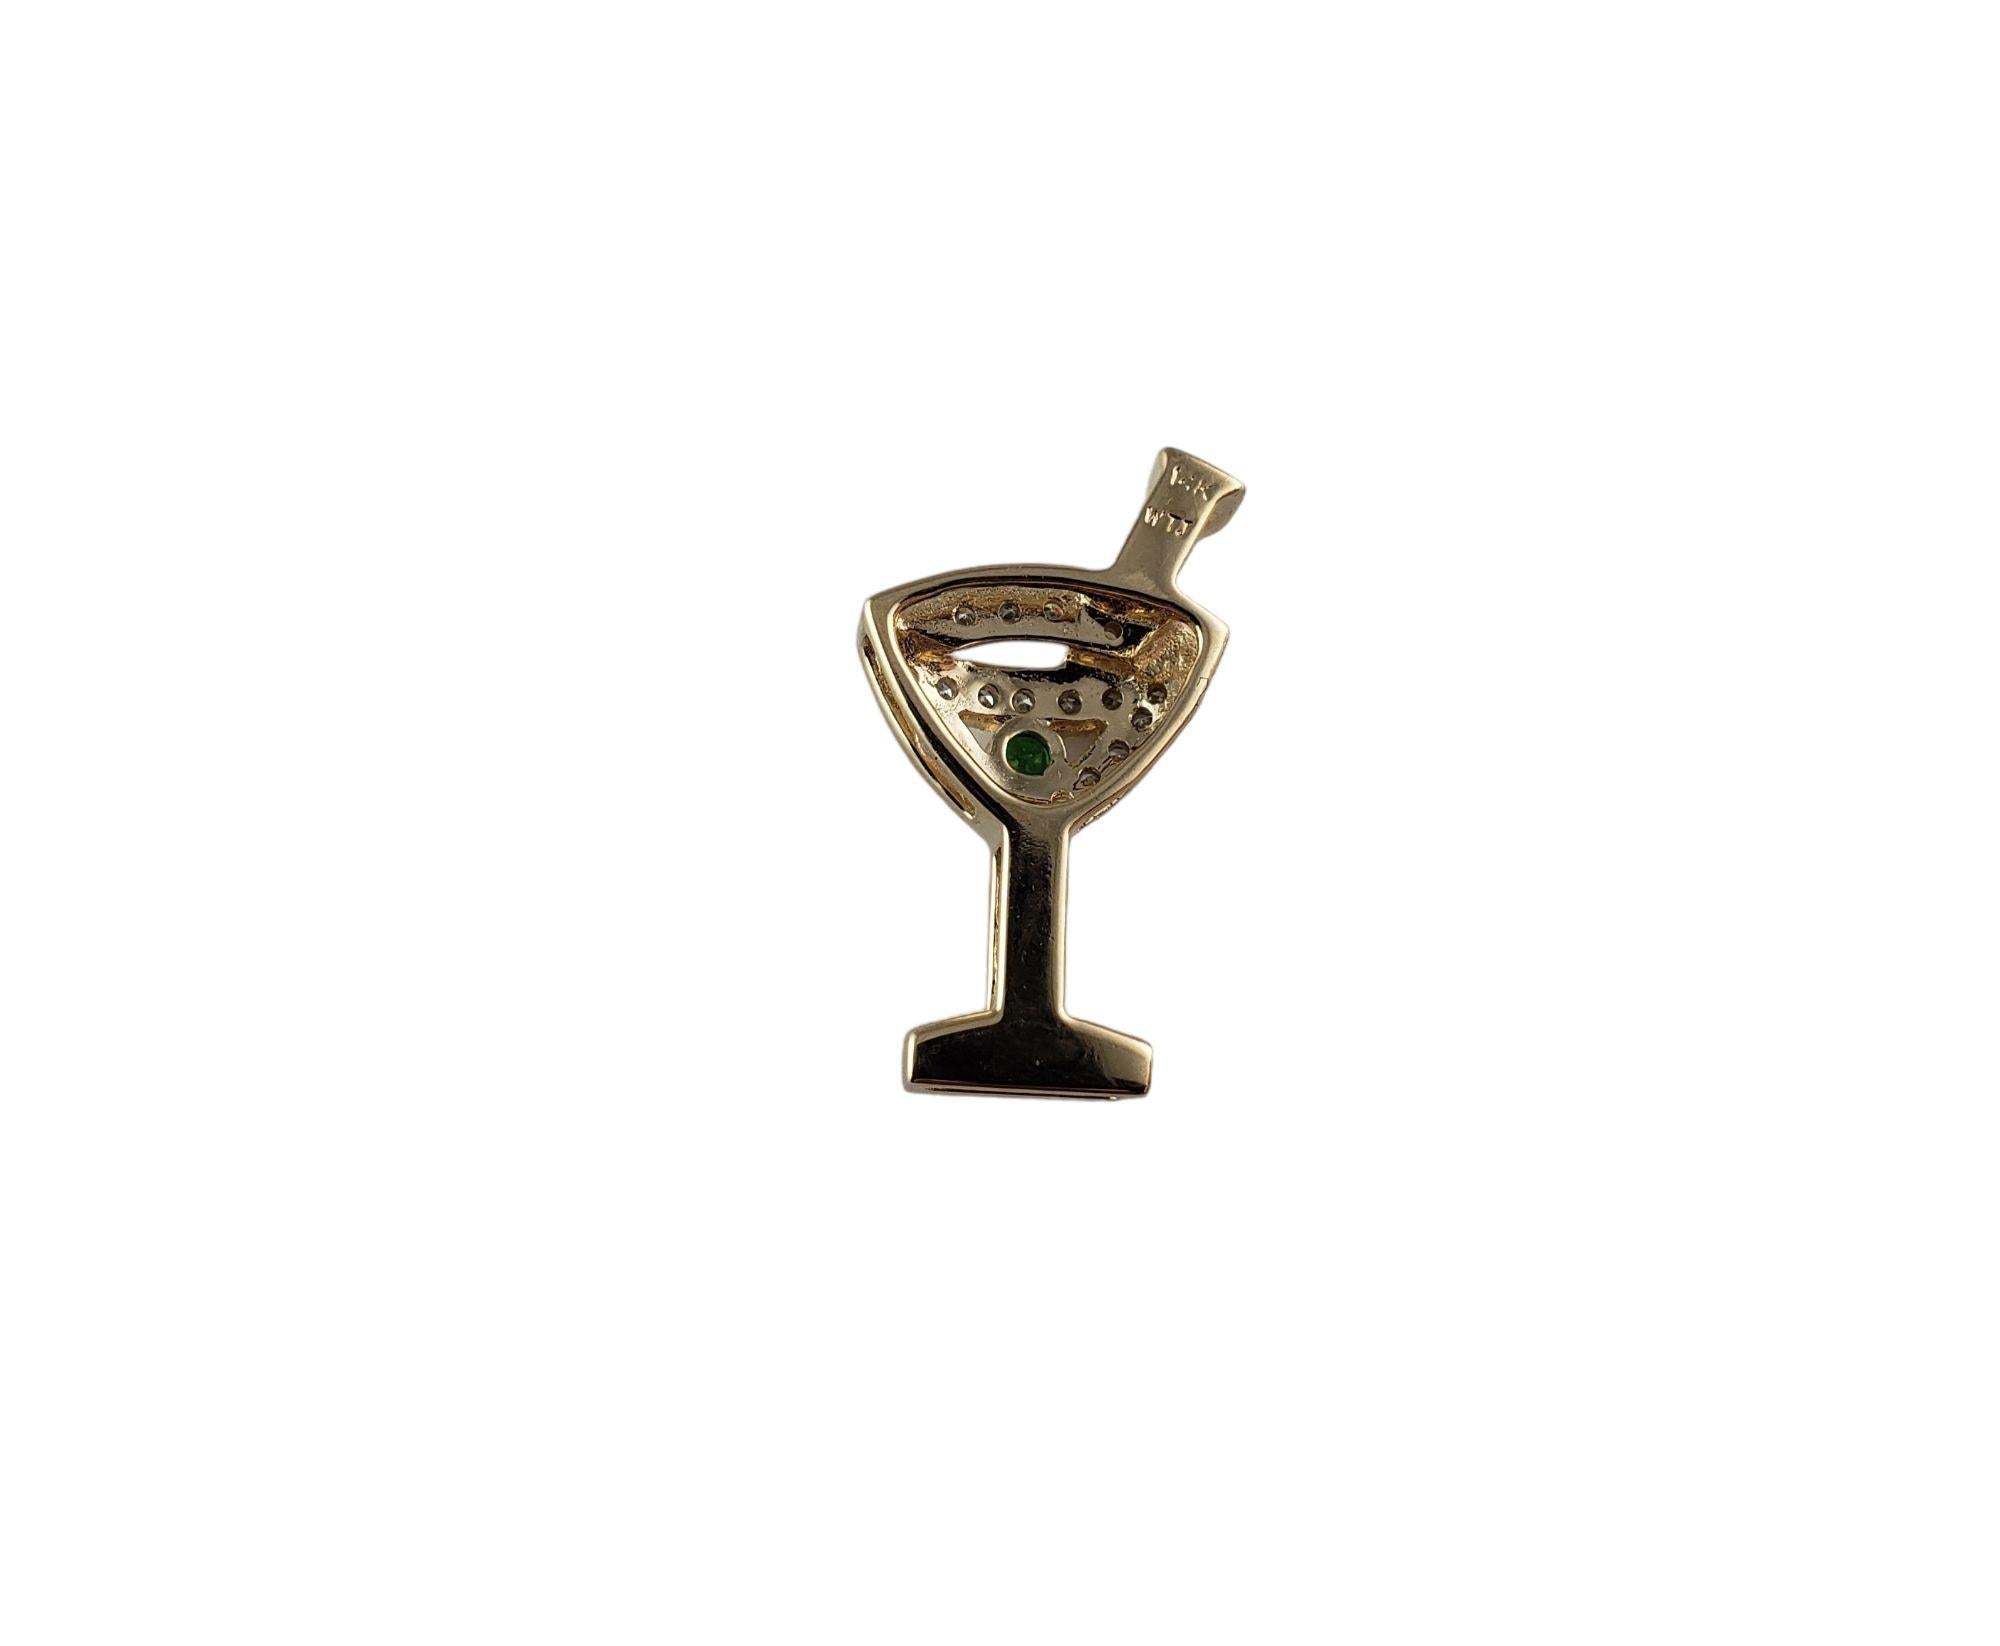 Vintage 14 Karat Yellow Gold and Diamond Martini Glass Charm-

Girl's night out!

This lovely martini glass charm features 33 round single cut diamonds and one green gemstone set in classic 14K yellow gold.

Approximate total diamond weight: .20